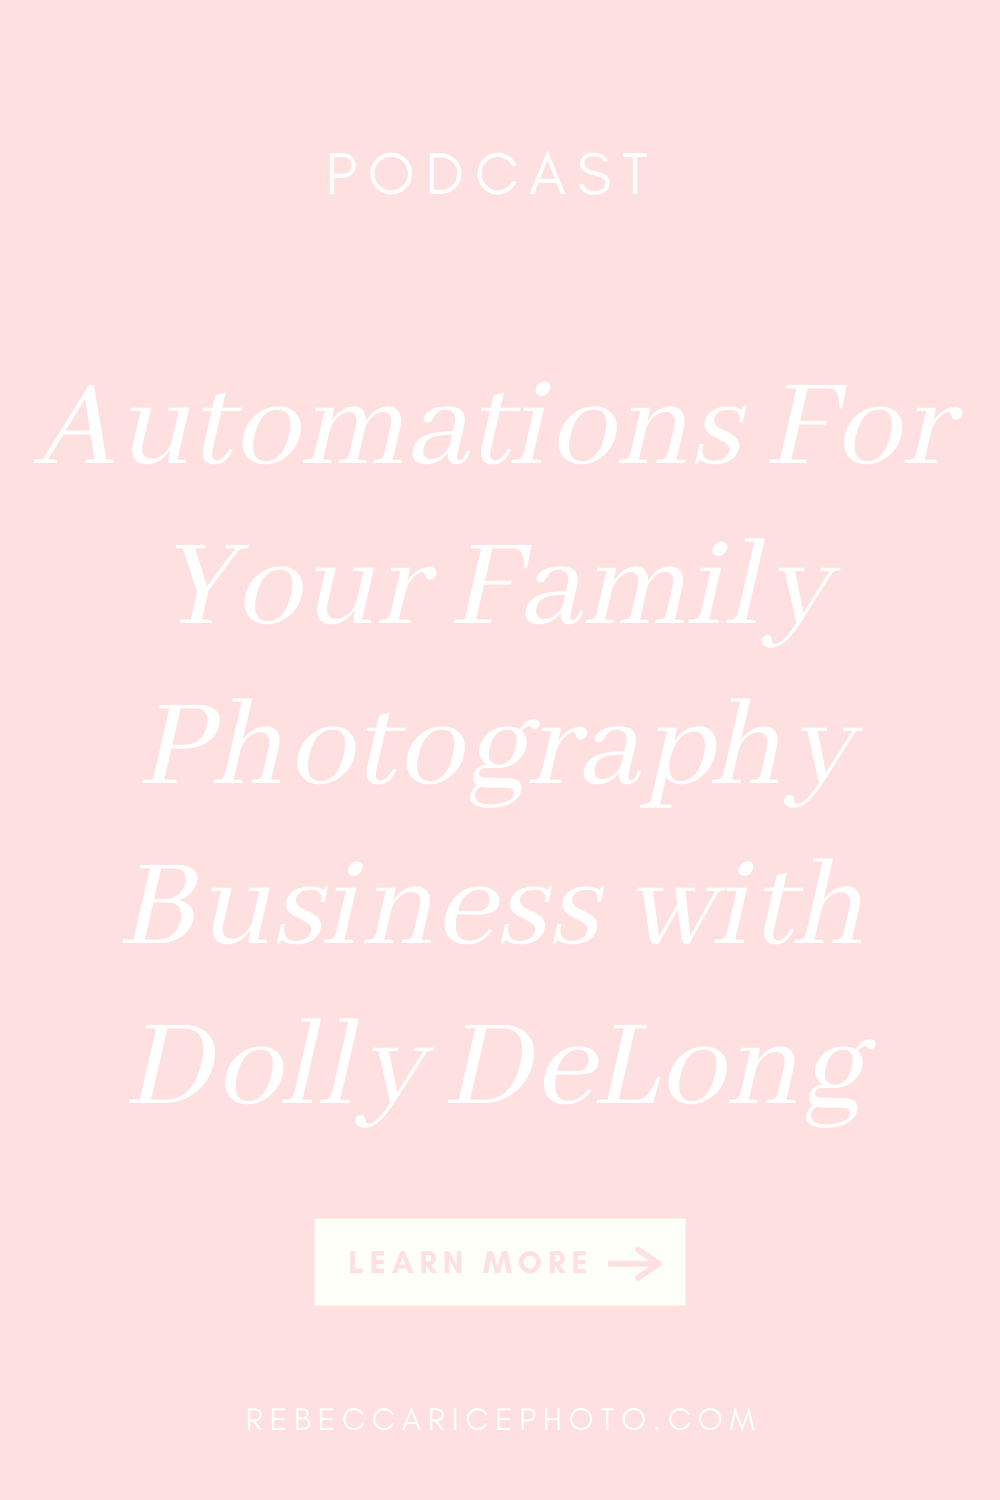 Automations for your Family Photography Business: Dolly DeLong, systems educator shares four ways to automate your photography business today